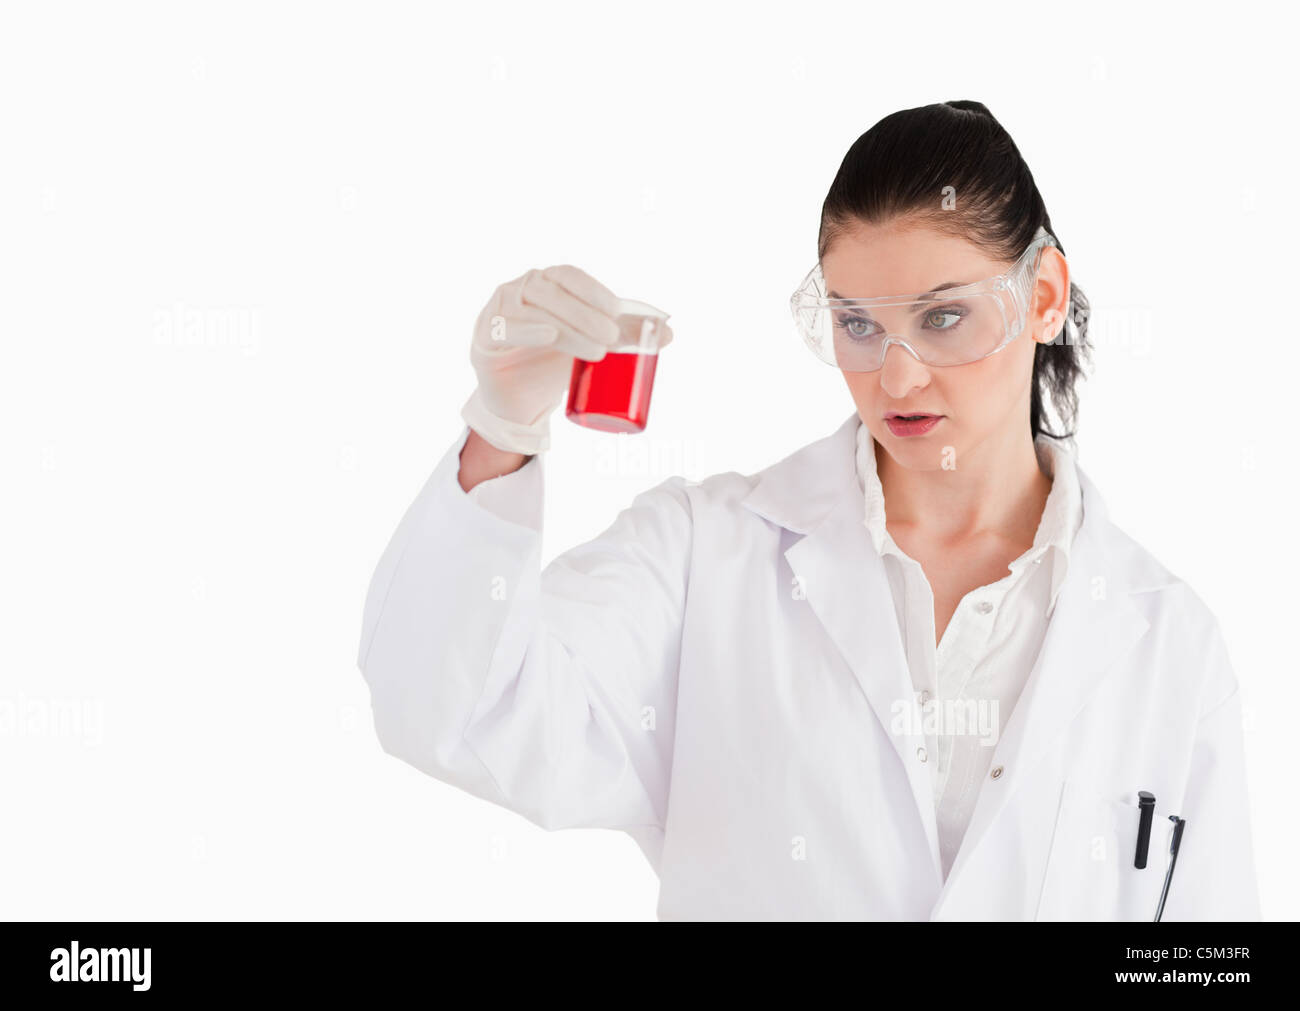 Dark-haired scientist with safety glasses looking at a red beaker Stock Photo